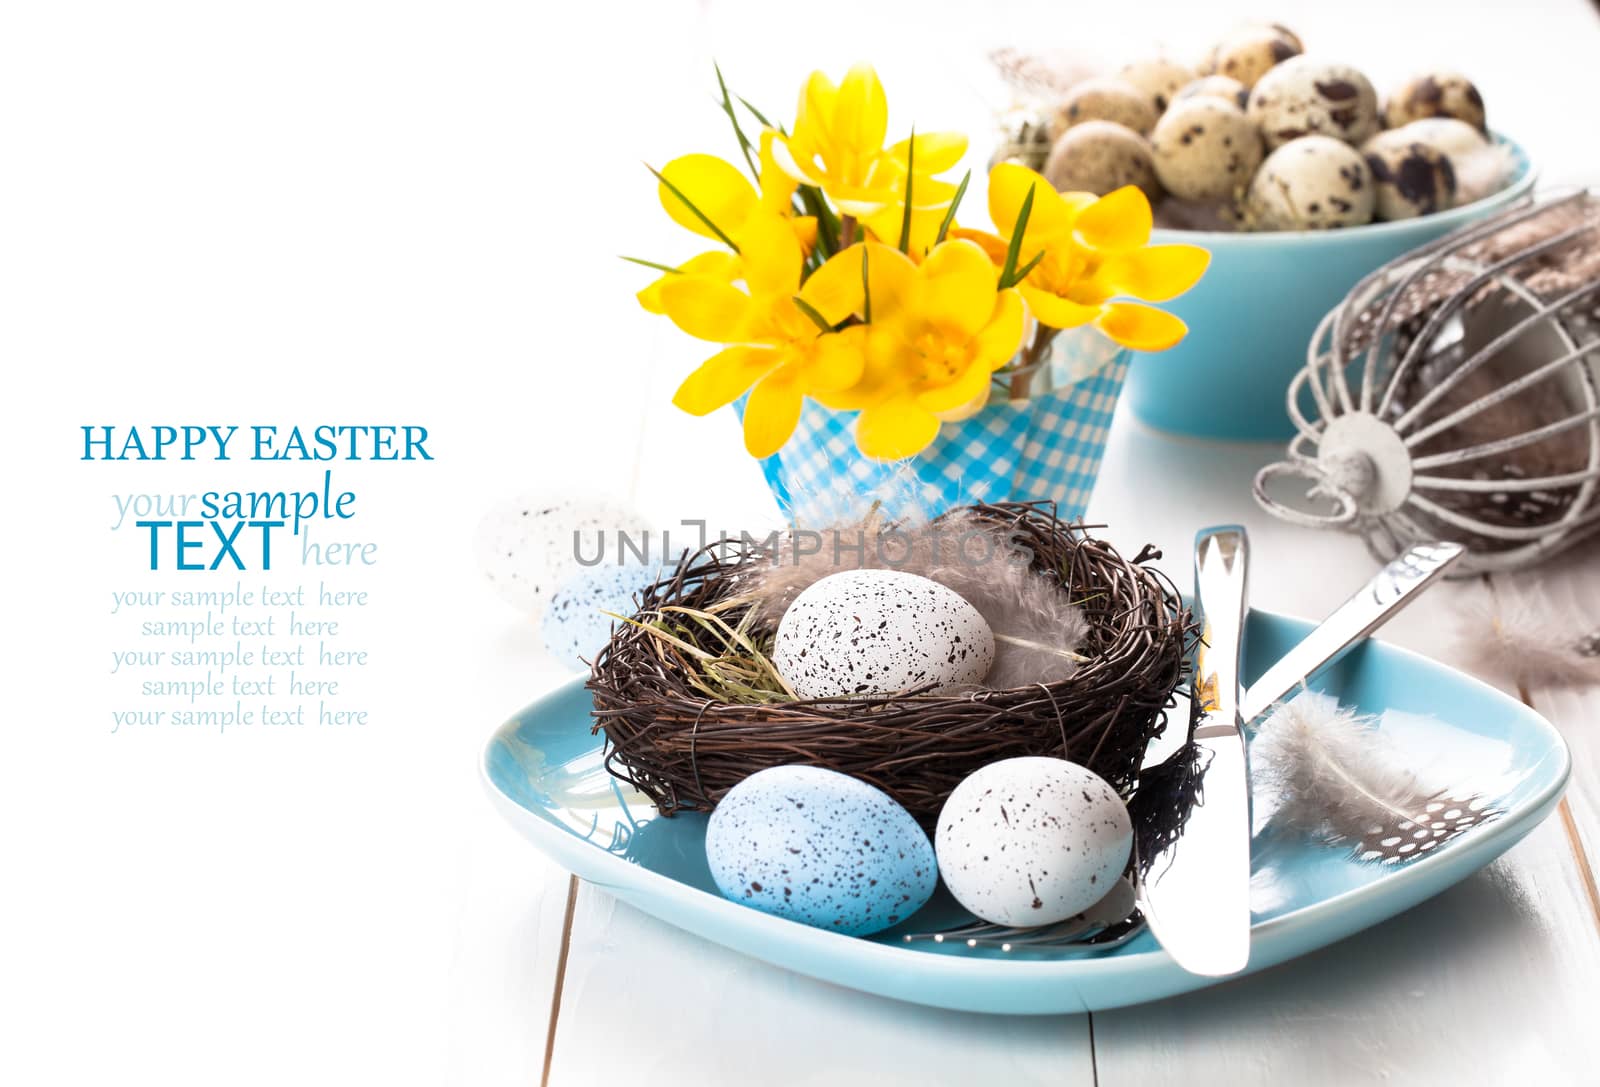 Easter eggs nest on plate with yellow Spring Crocus. on white wooden background